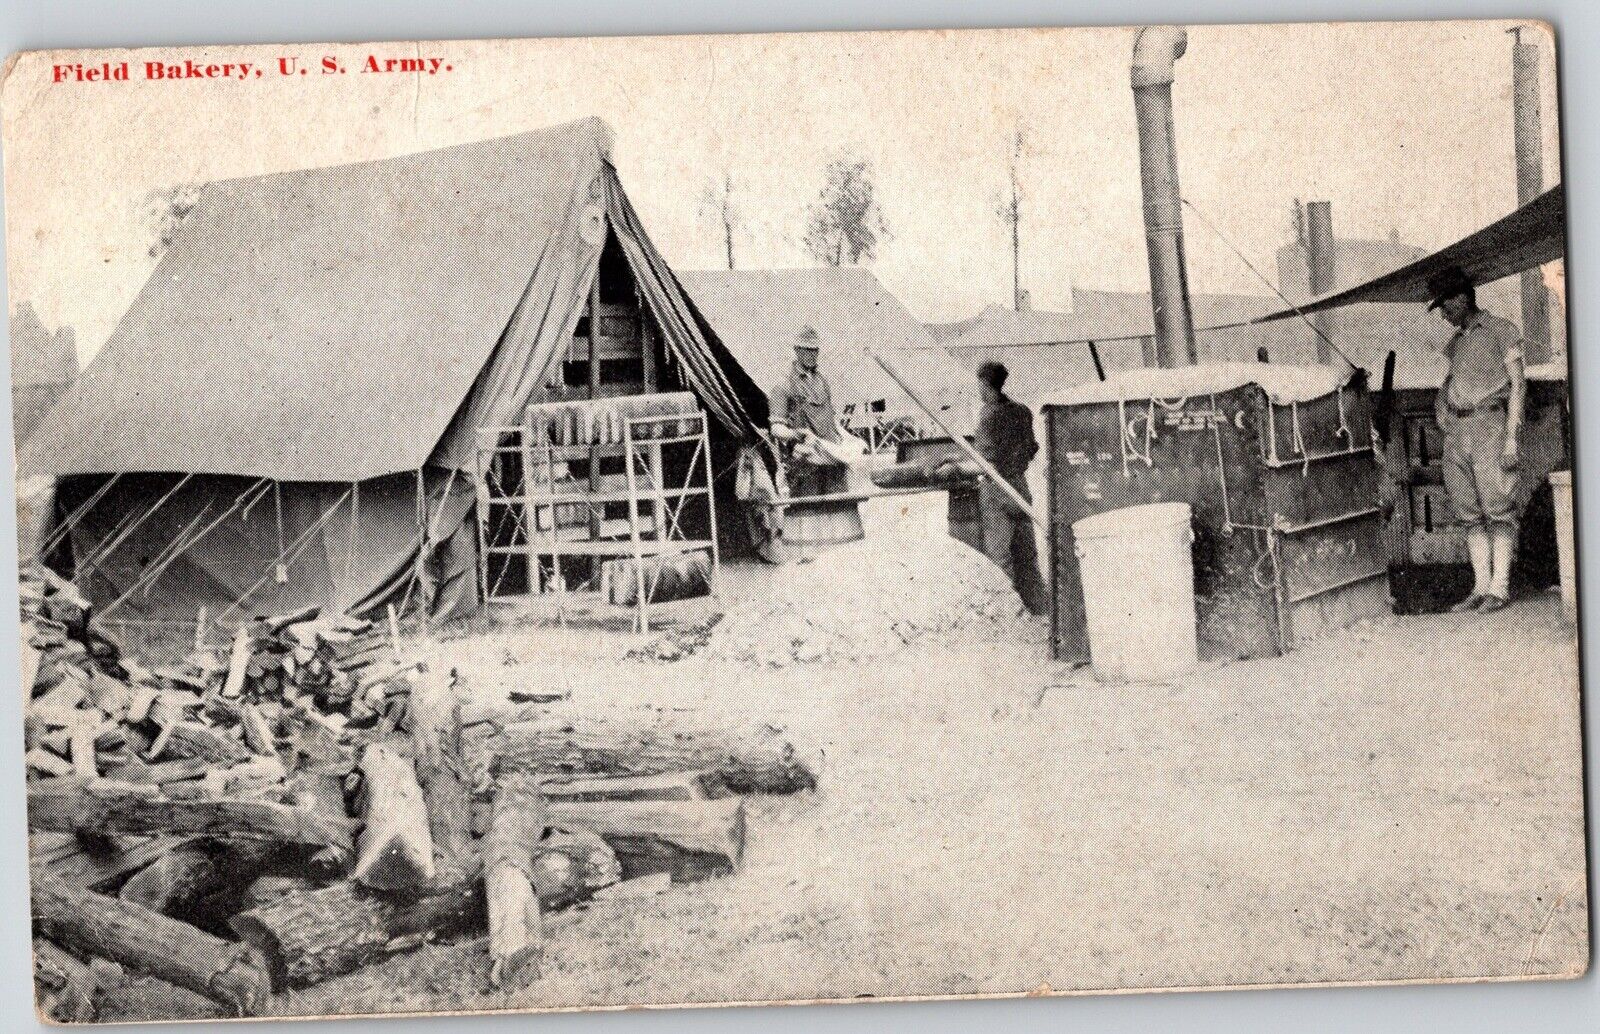 c. 1918 Vintage Real Photo Postcard RPPC WWI US Army Field Bakery - Great Gift